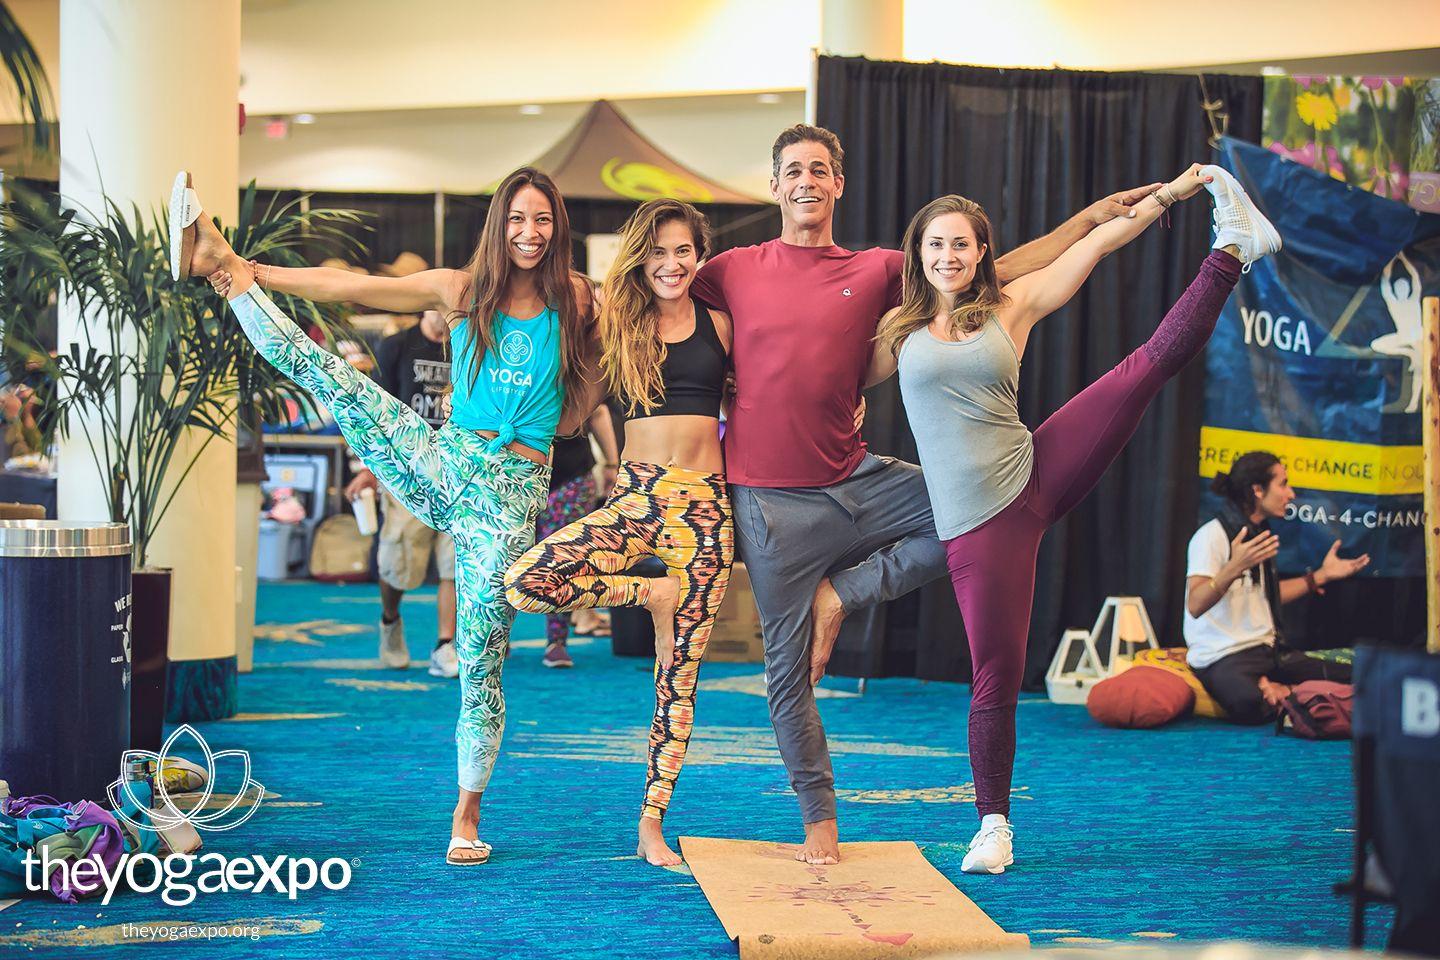 North America’s Largest Yoga Conference & Trade Show Comes To South Florida